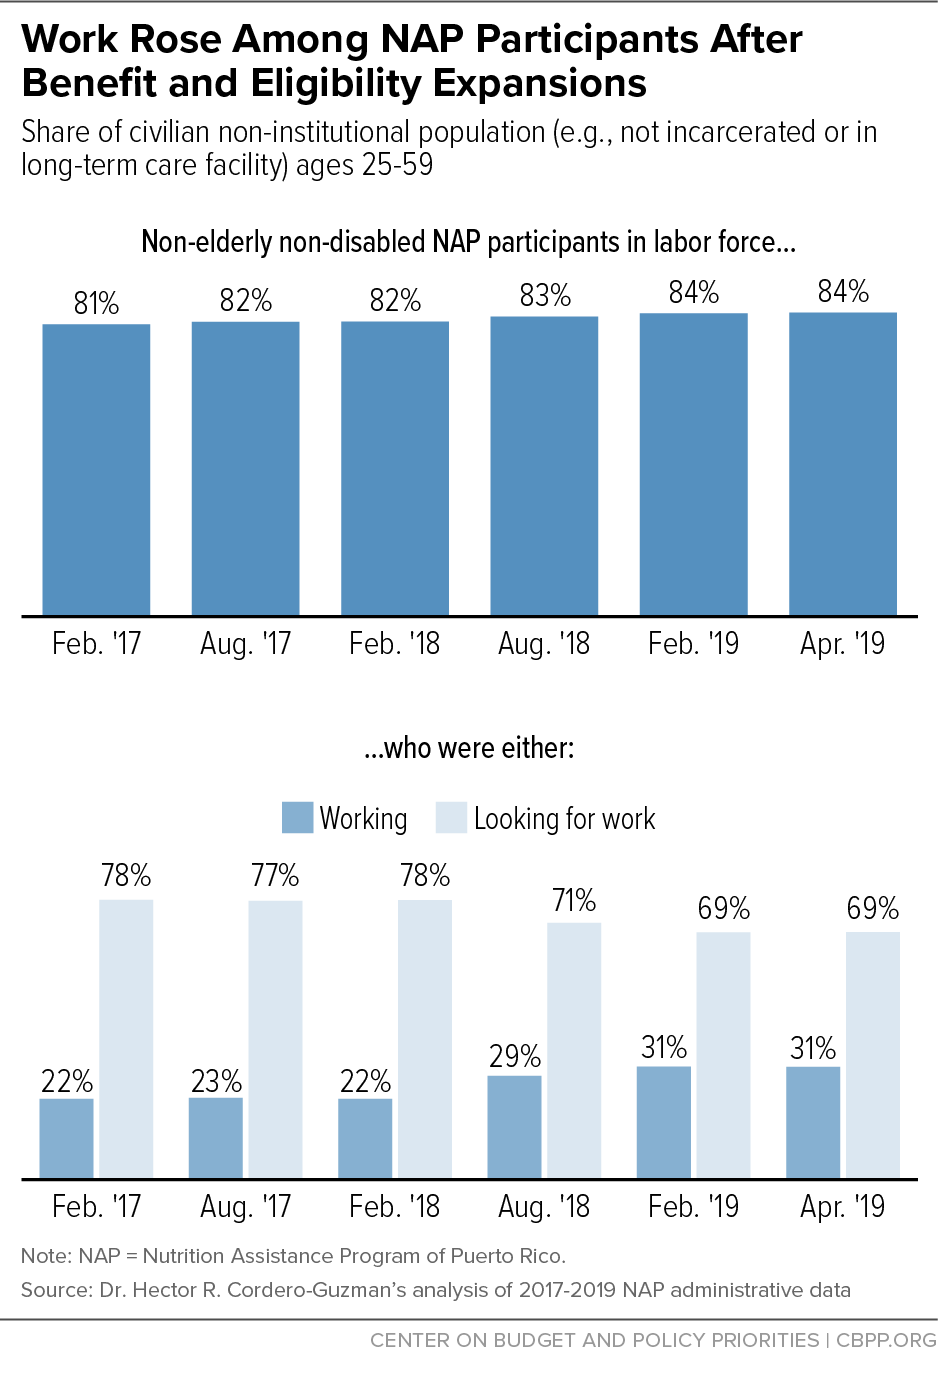 Work Rose Among NAP Participants After Benefit and Eligibility Expansions